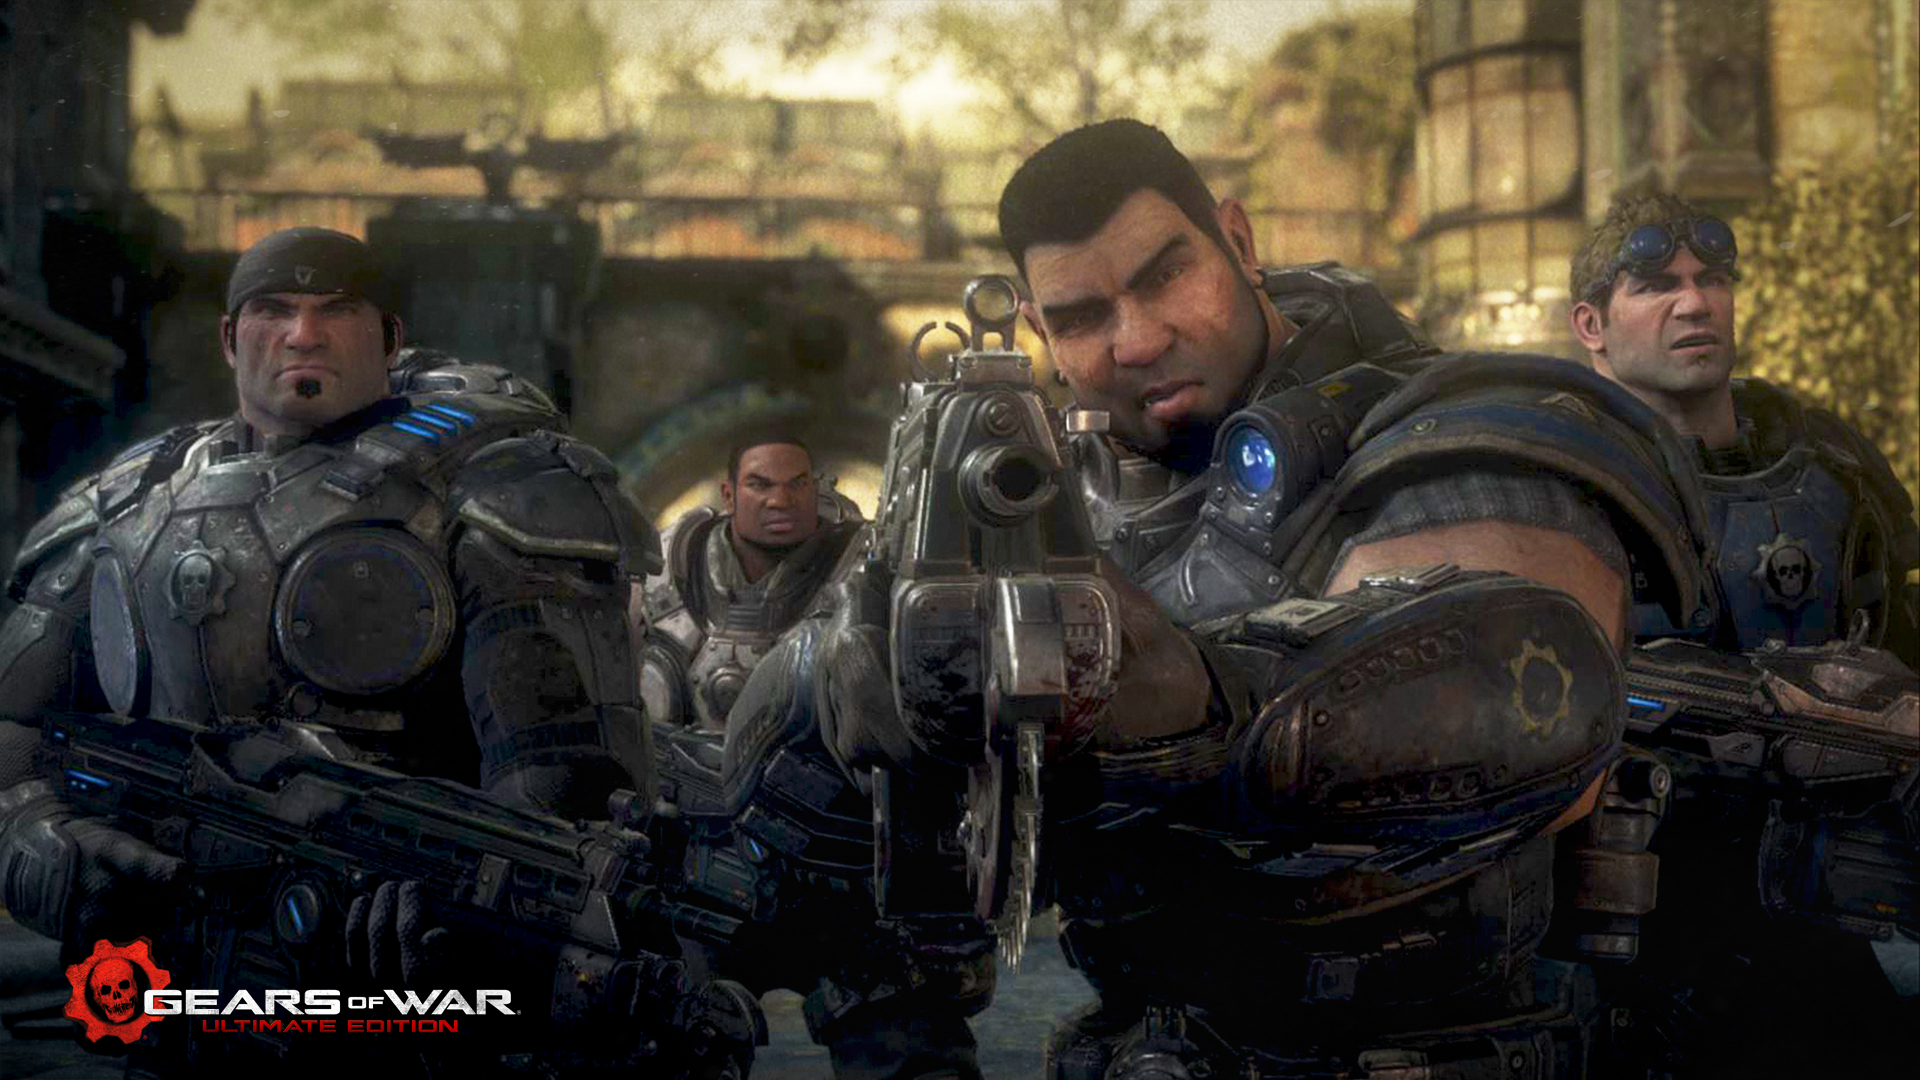 Marcus? Is That You? achievement in Gears of War: Ultimate Edition